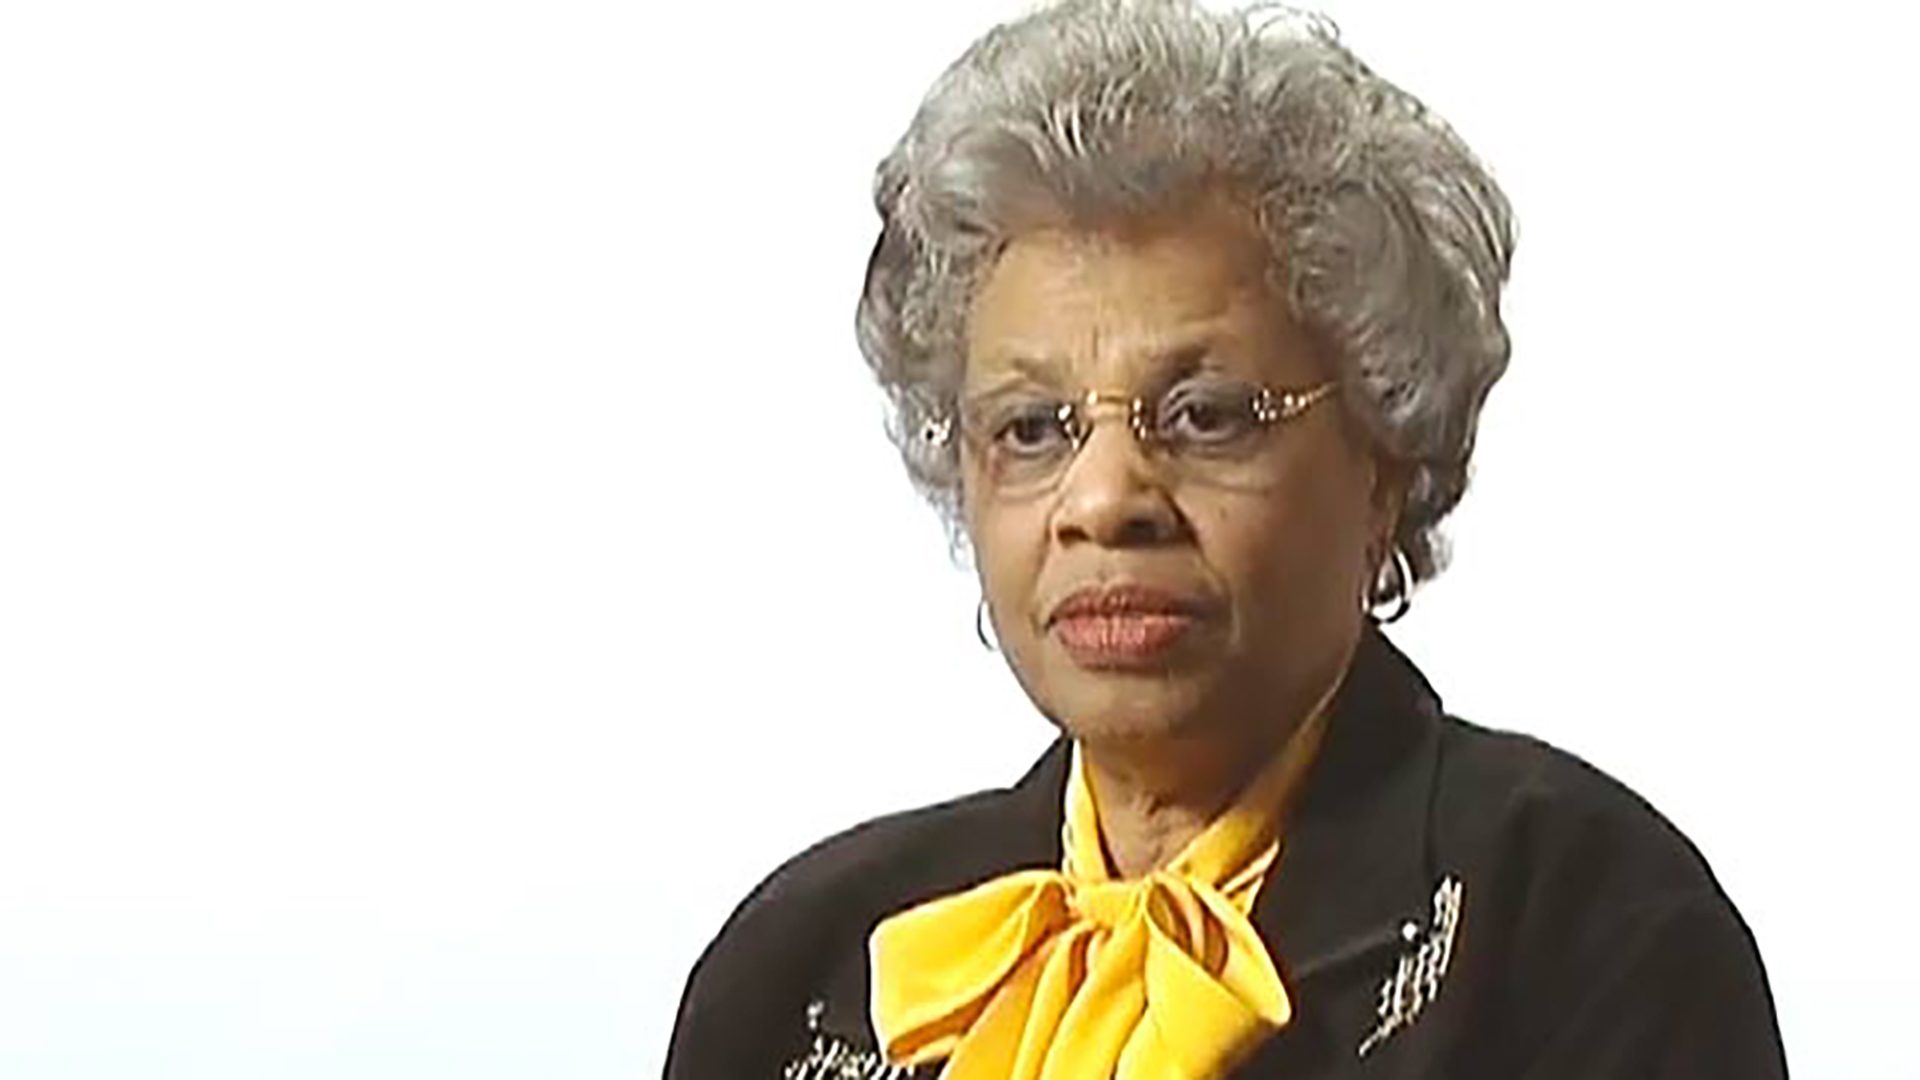 A senior woman with curly gray hair wearing glasses and a yellow necktie is interviewed against a white background.